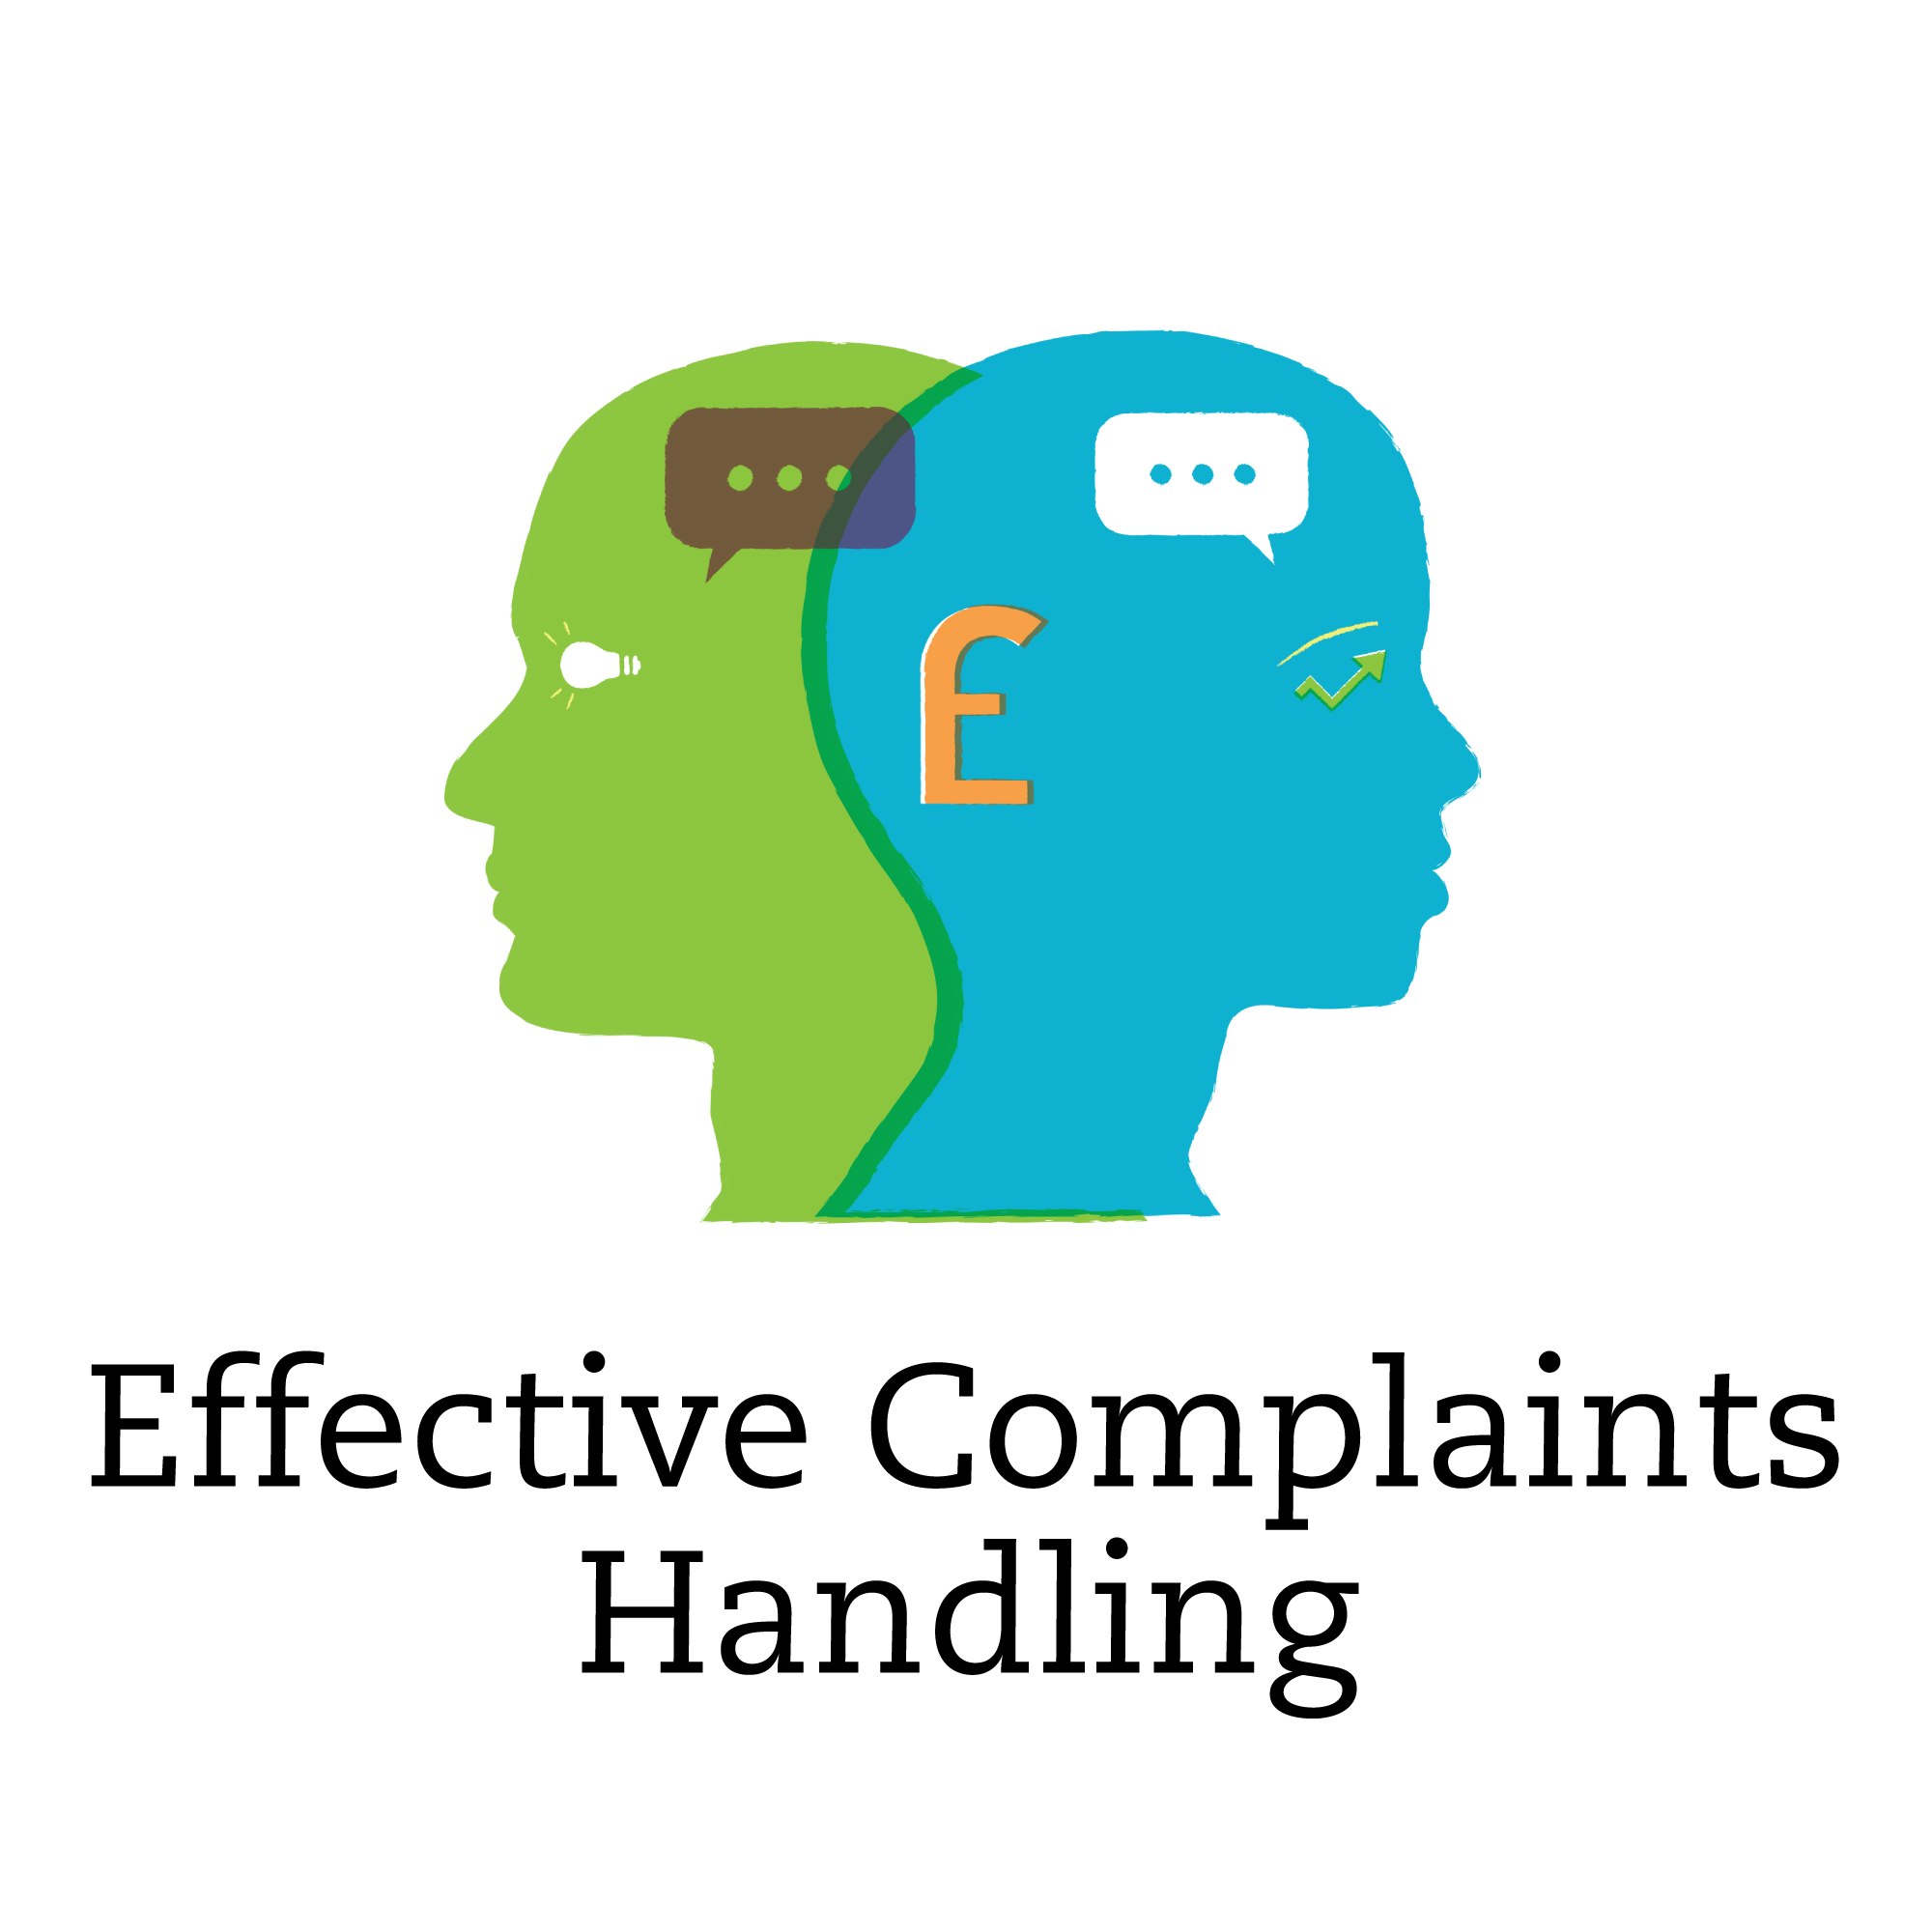 Introduction to Effective Complaints Handling (16 Mar)